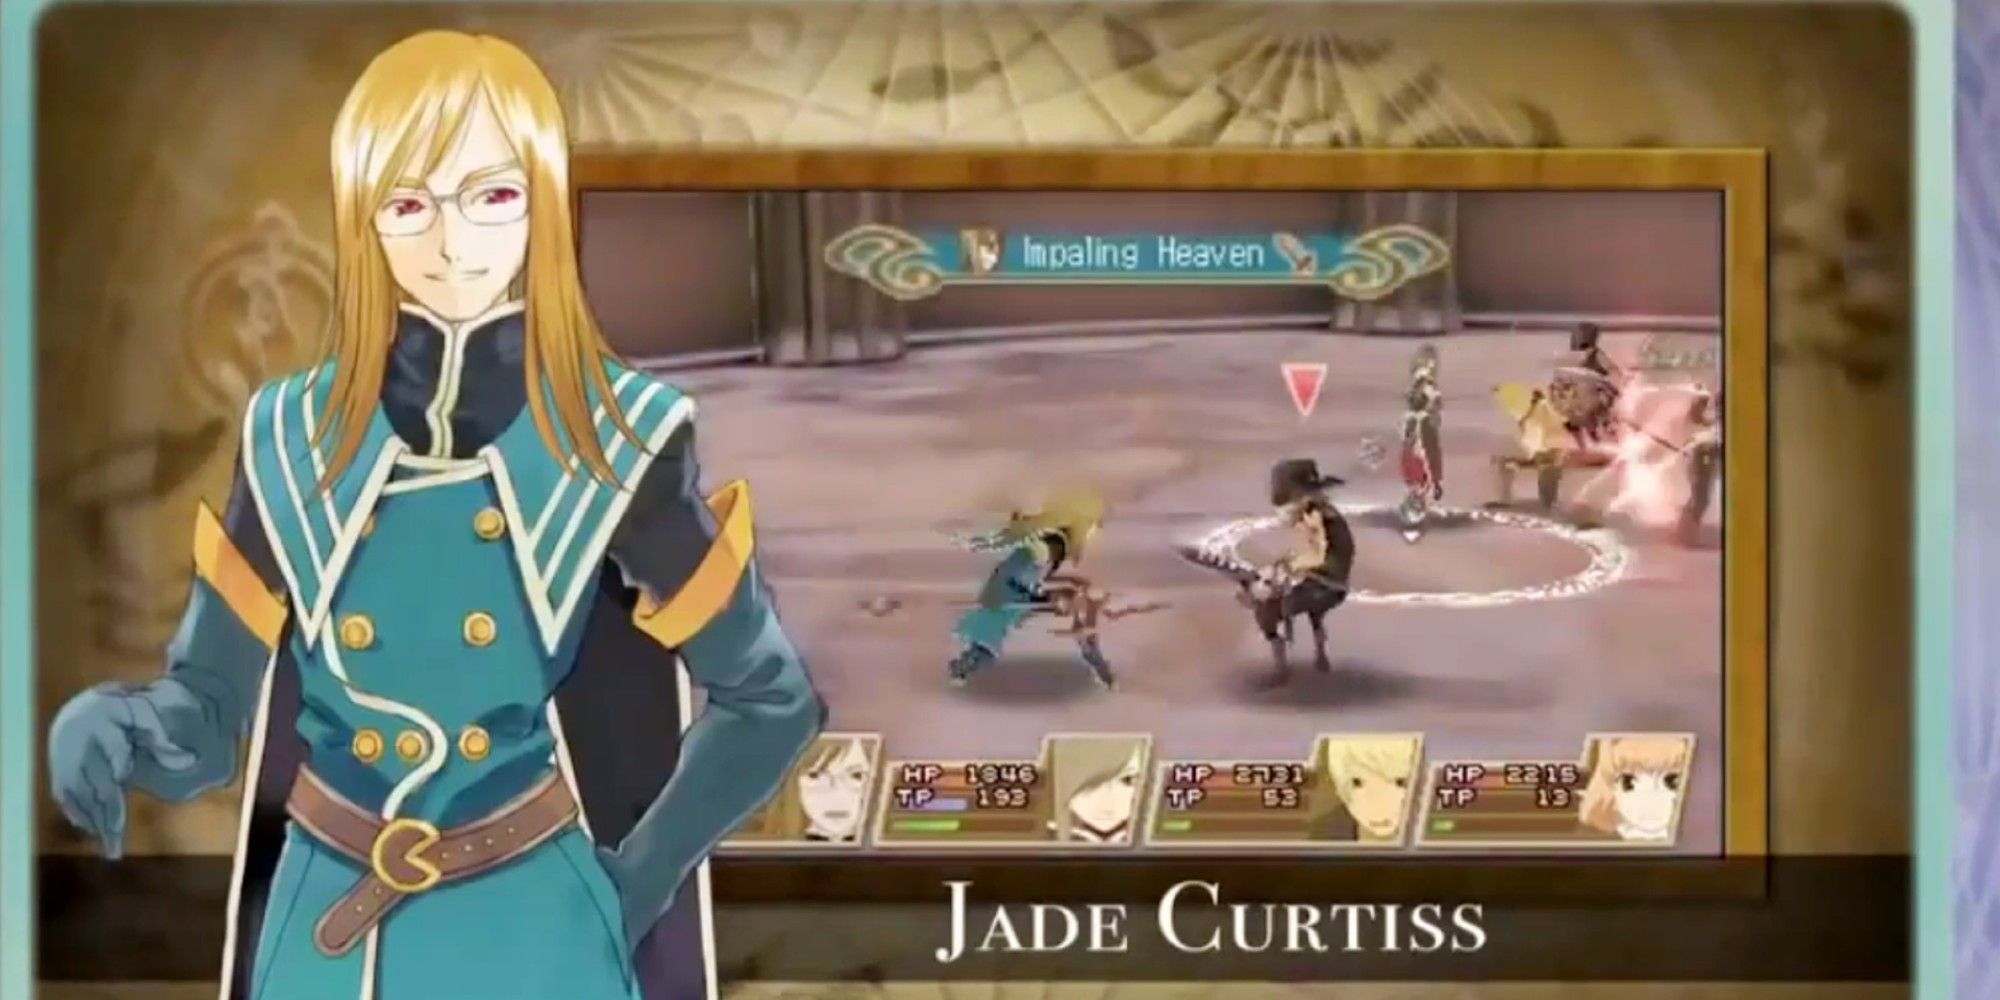 Jade Curtiss Tales of The Abyss showing off his gameplay